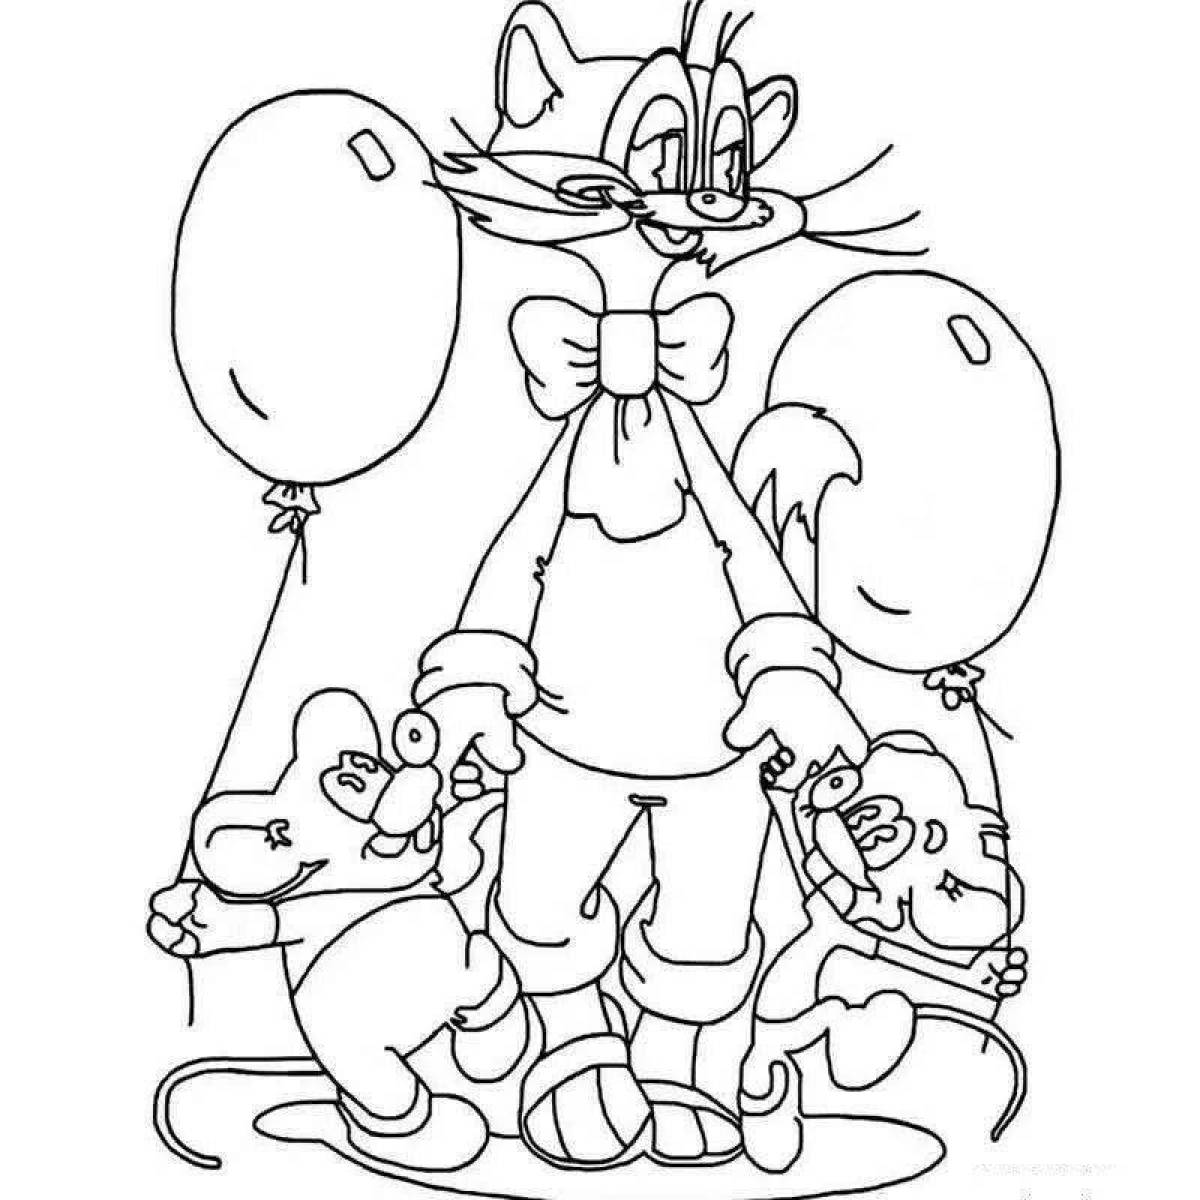 Playful score within 100 2 class coloring page